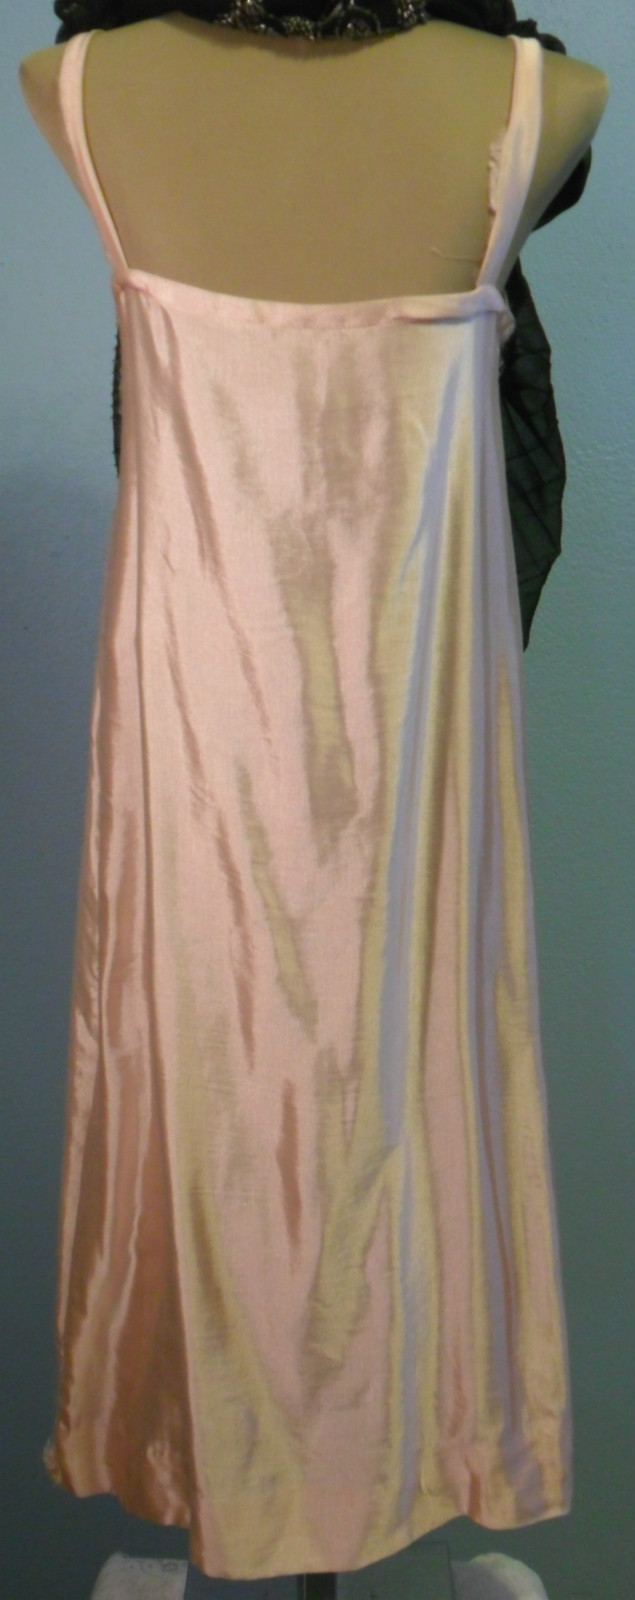 All The Pretty Dresses: Lovely 1920's Dress with pink slip